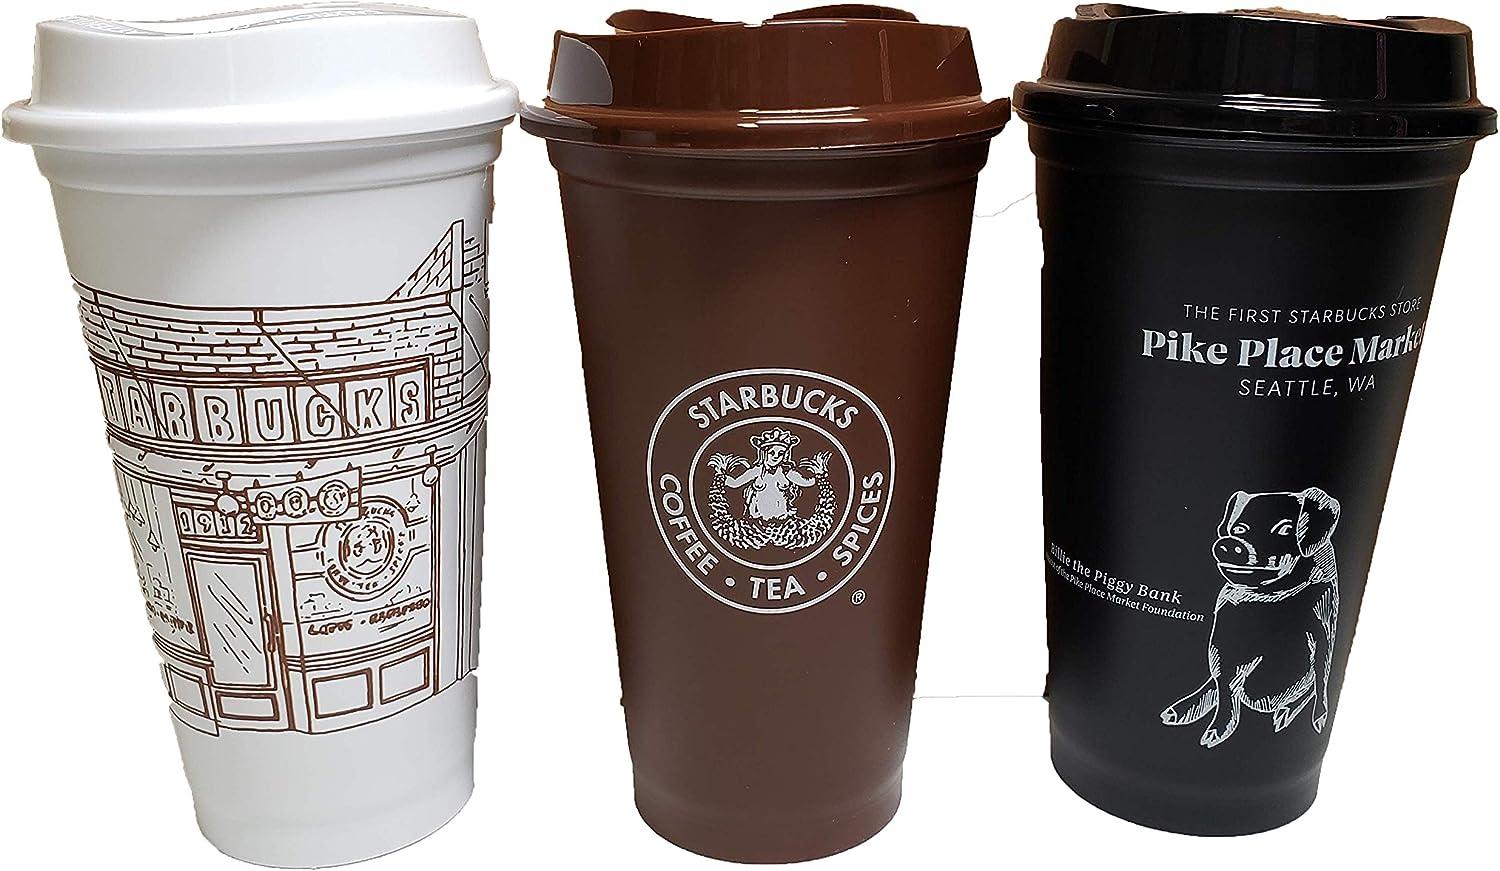 Starbucks Reusable Hot Cup Collection Pack